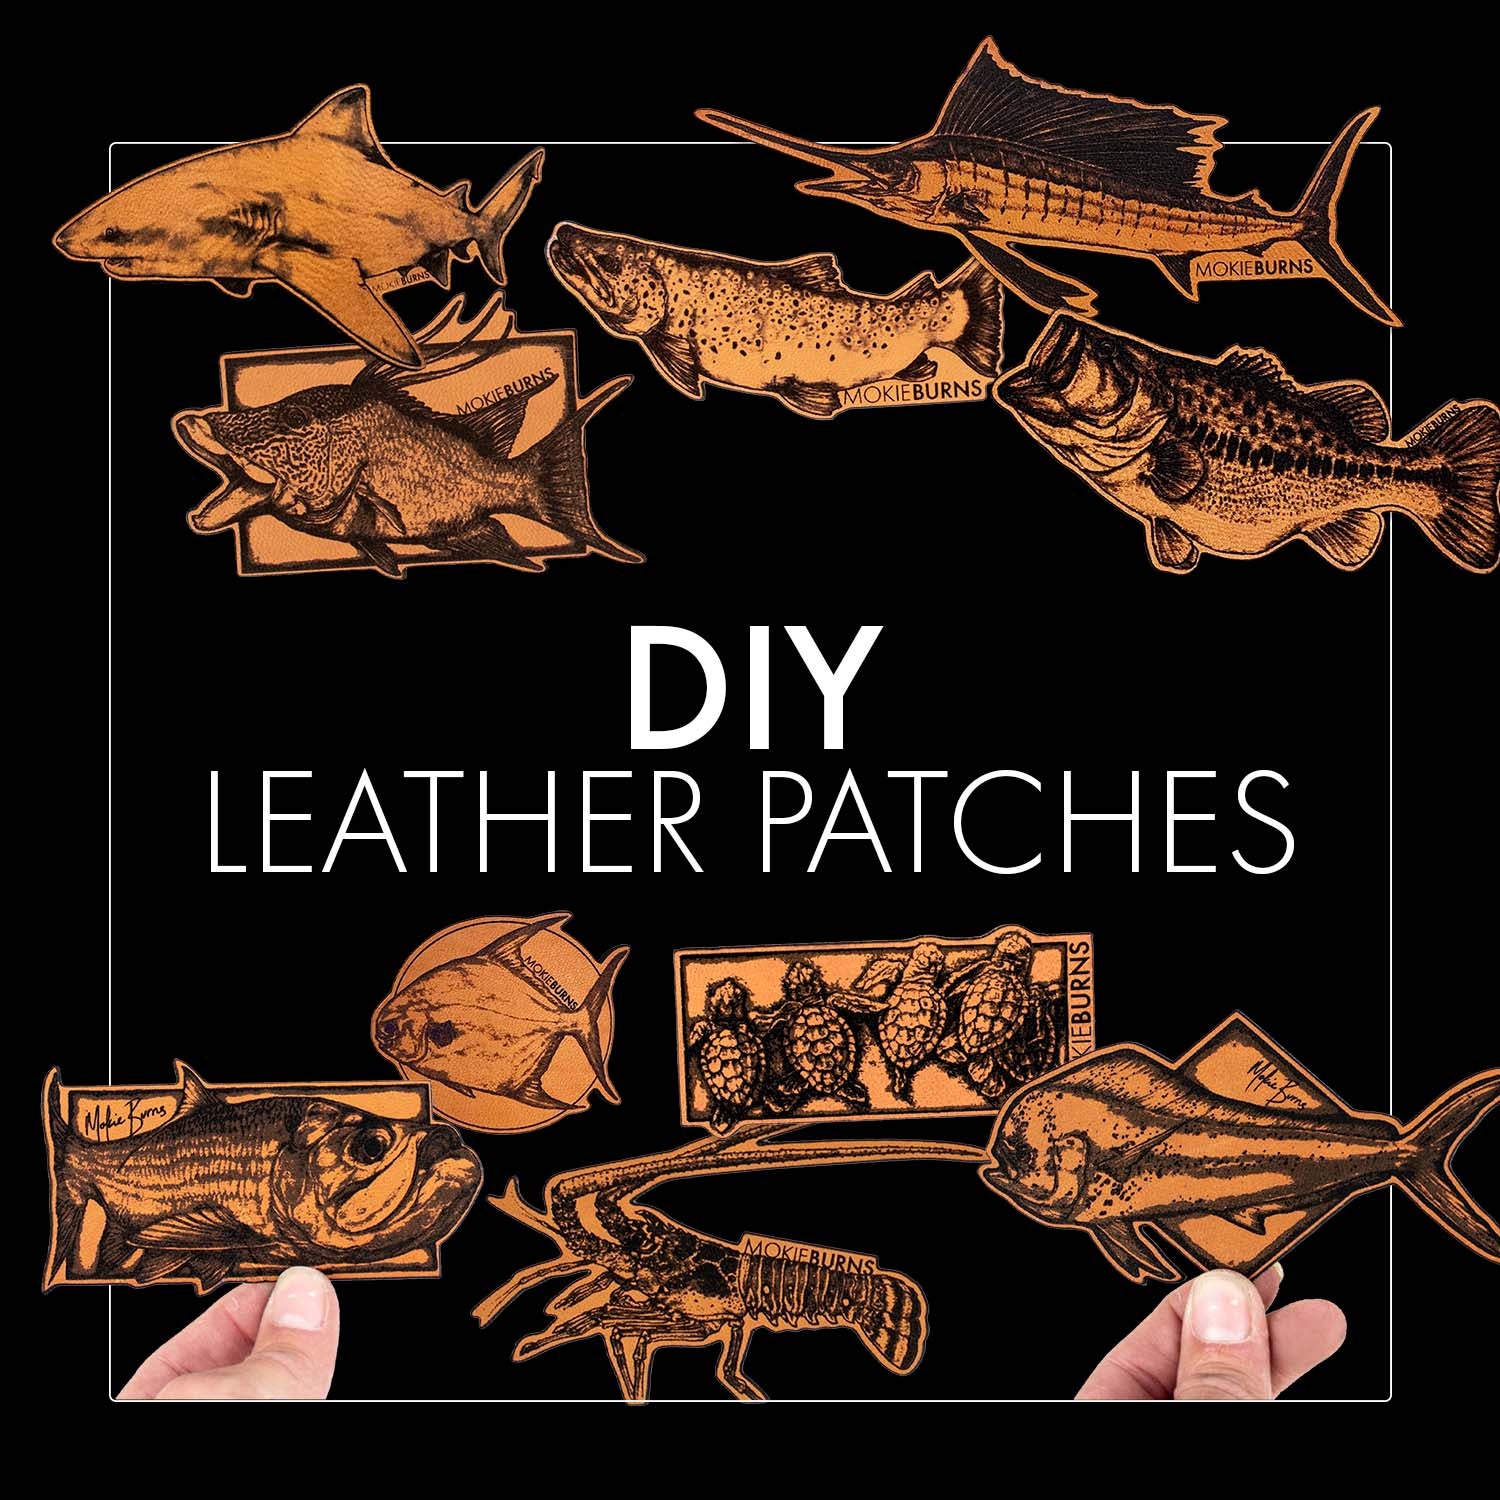 Fish Art Genuine leather patches by mokie burns, create your own DIY leather patch item! Choose from a variety of saltwater and freshwater fish.